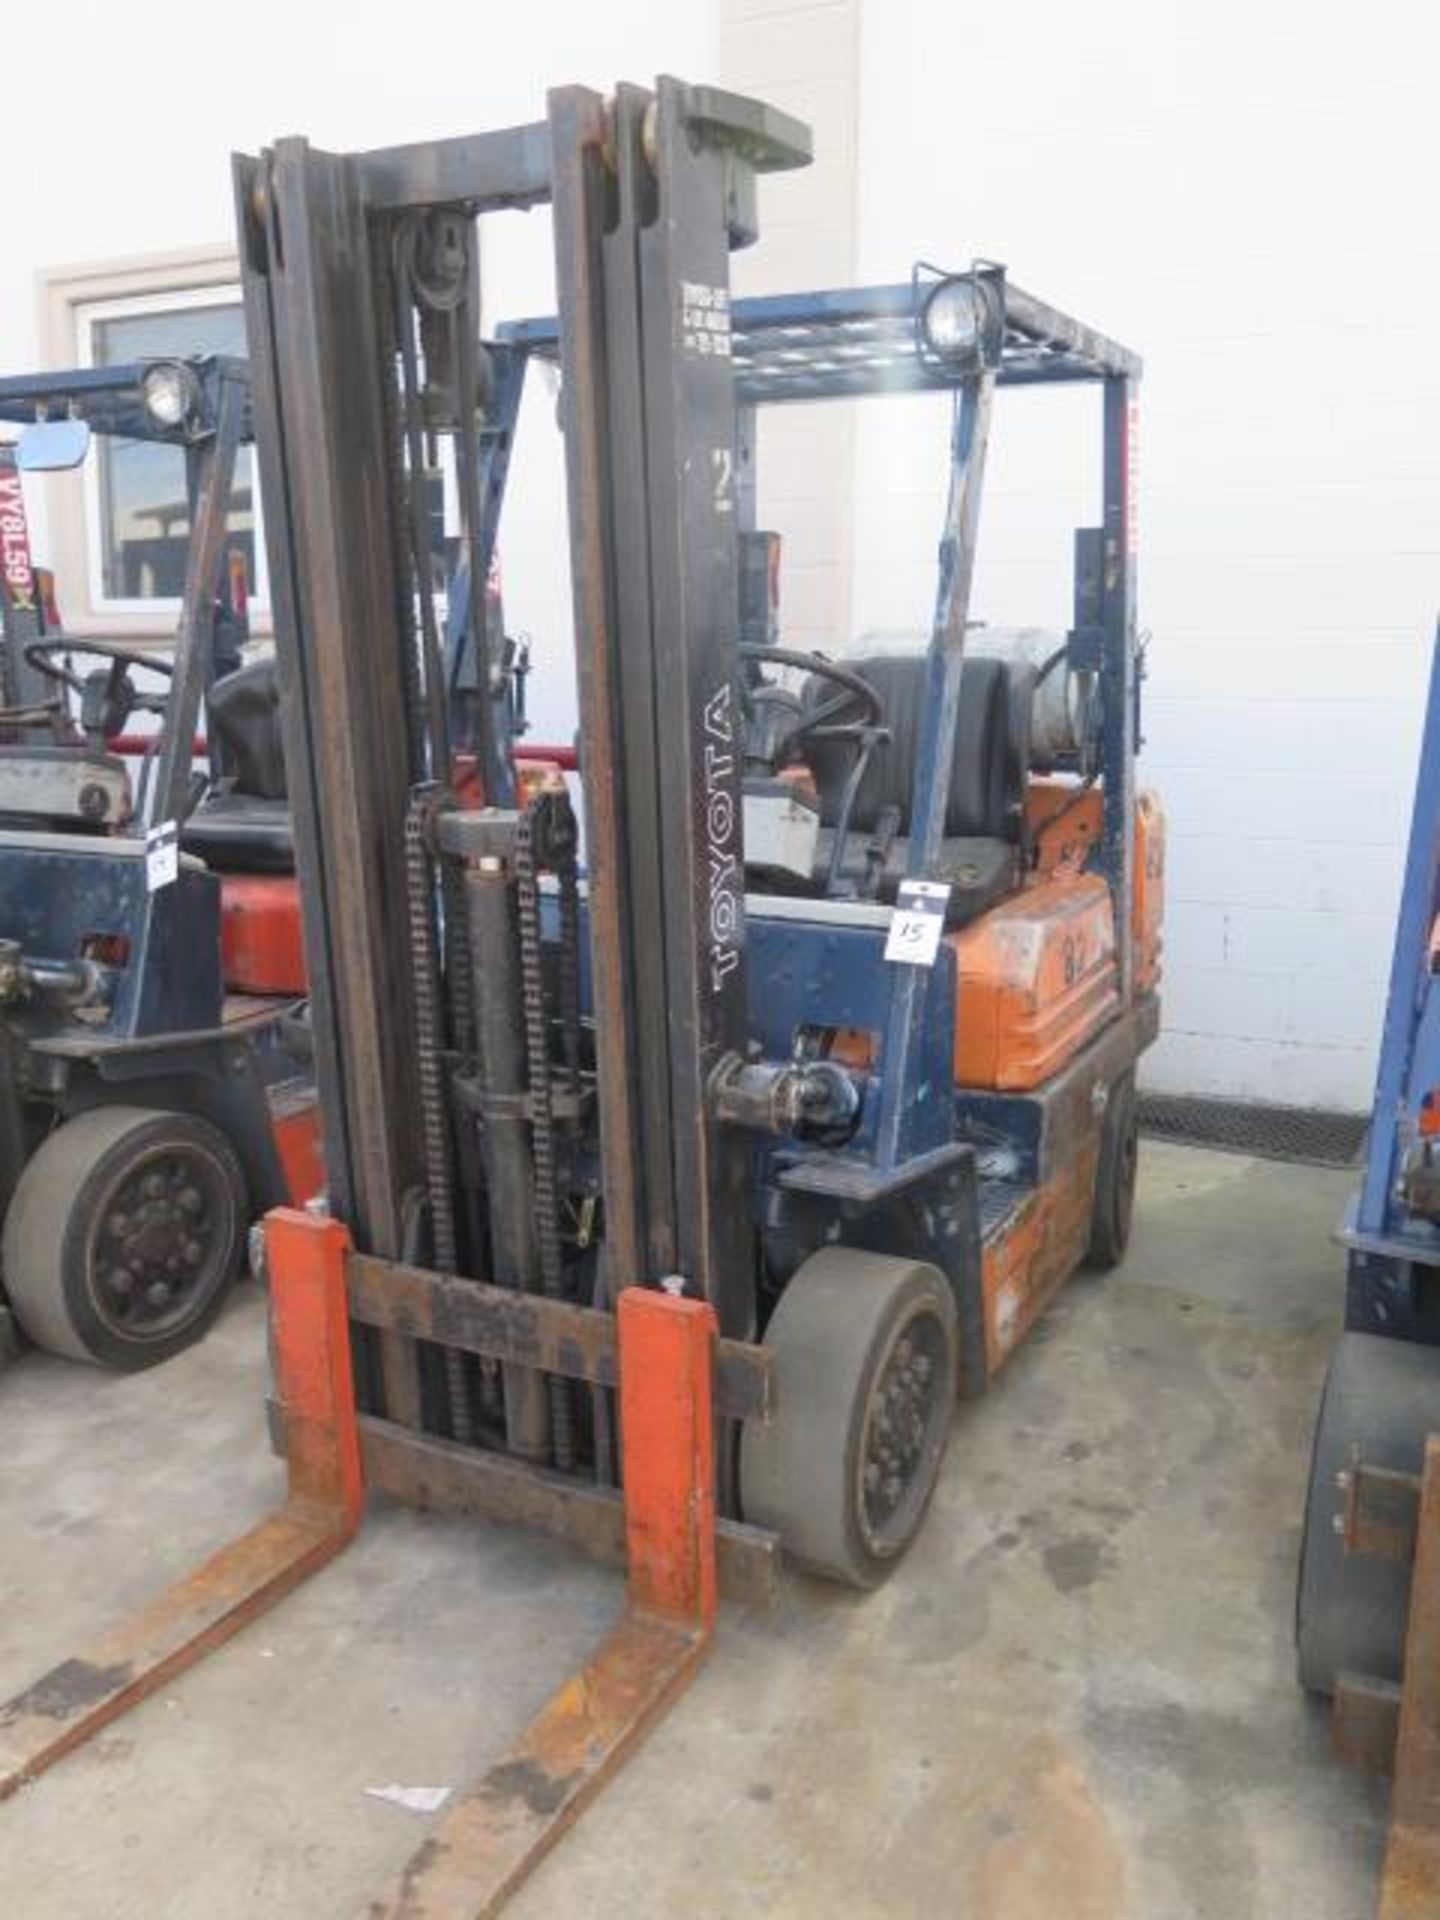 Toyota 5FGC25 5000 Lb Cap LPG Forklift s/n 84733 w/ 3-Stage Mast, 197" Lift Height, Cushion Tires,